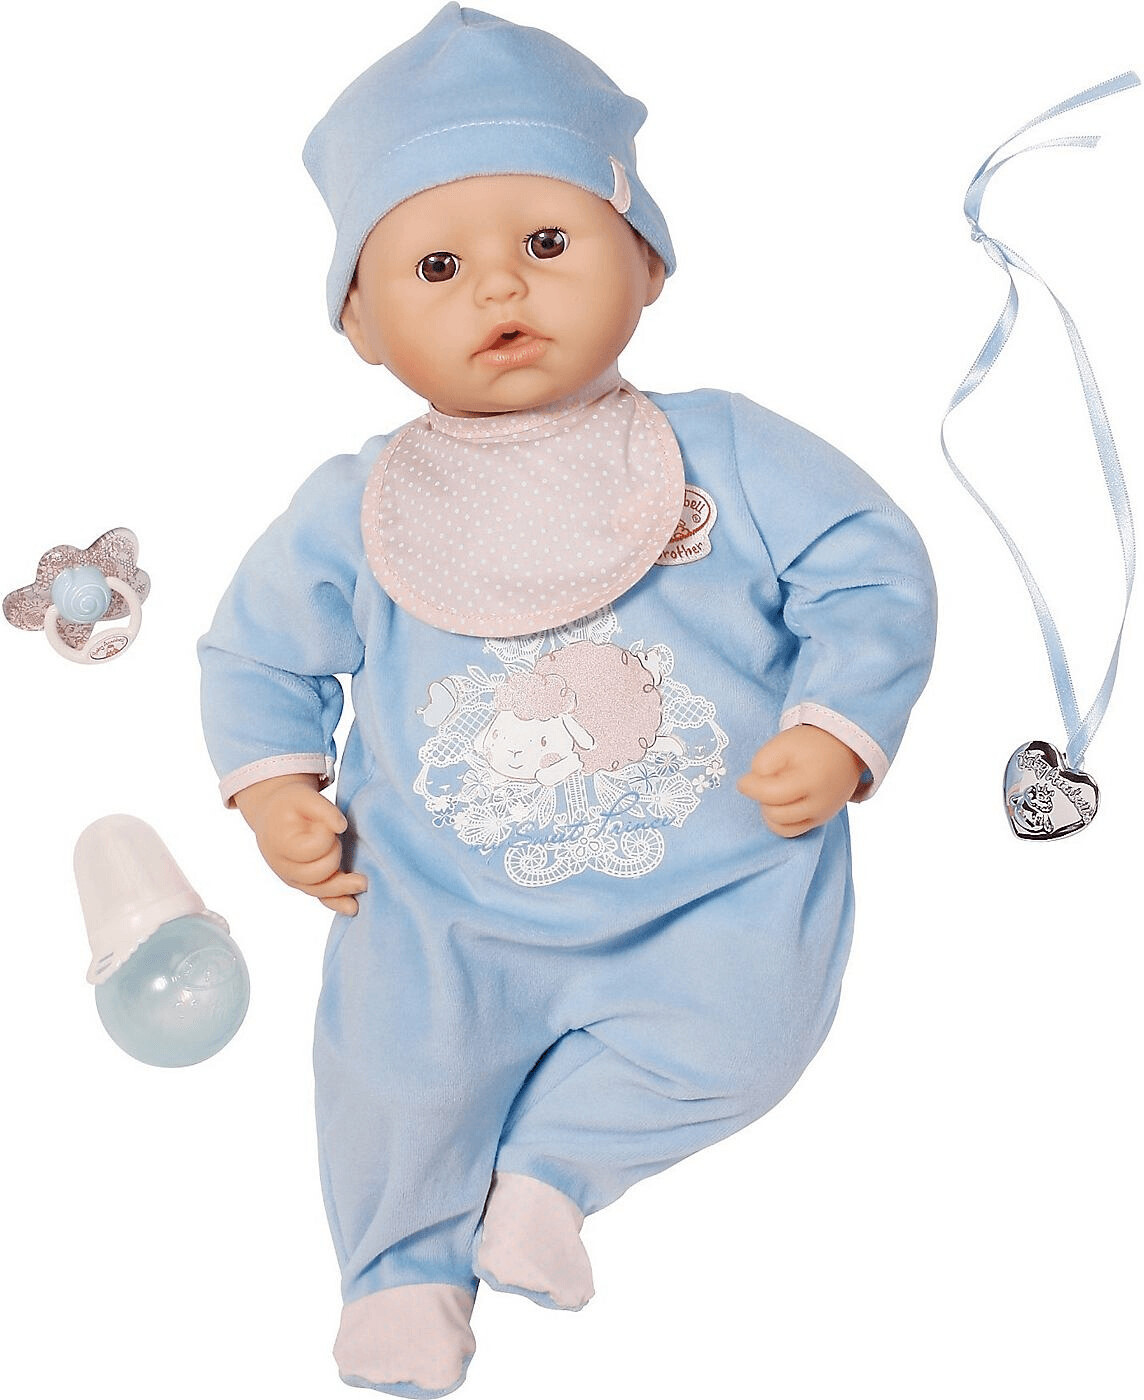 Baby Annabell Baby Annabell Brother (792827)